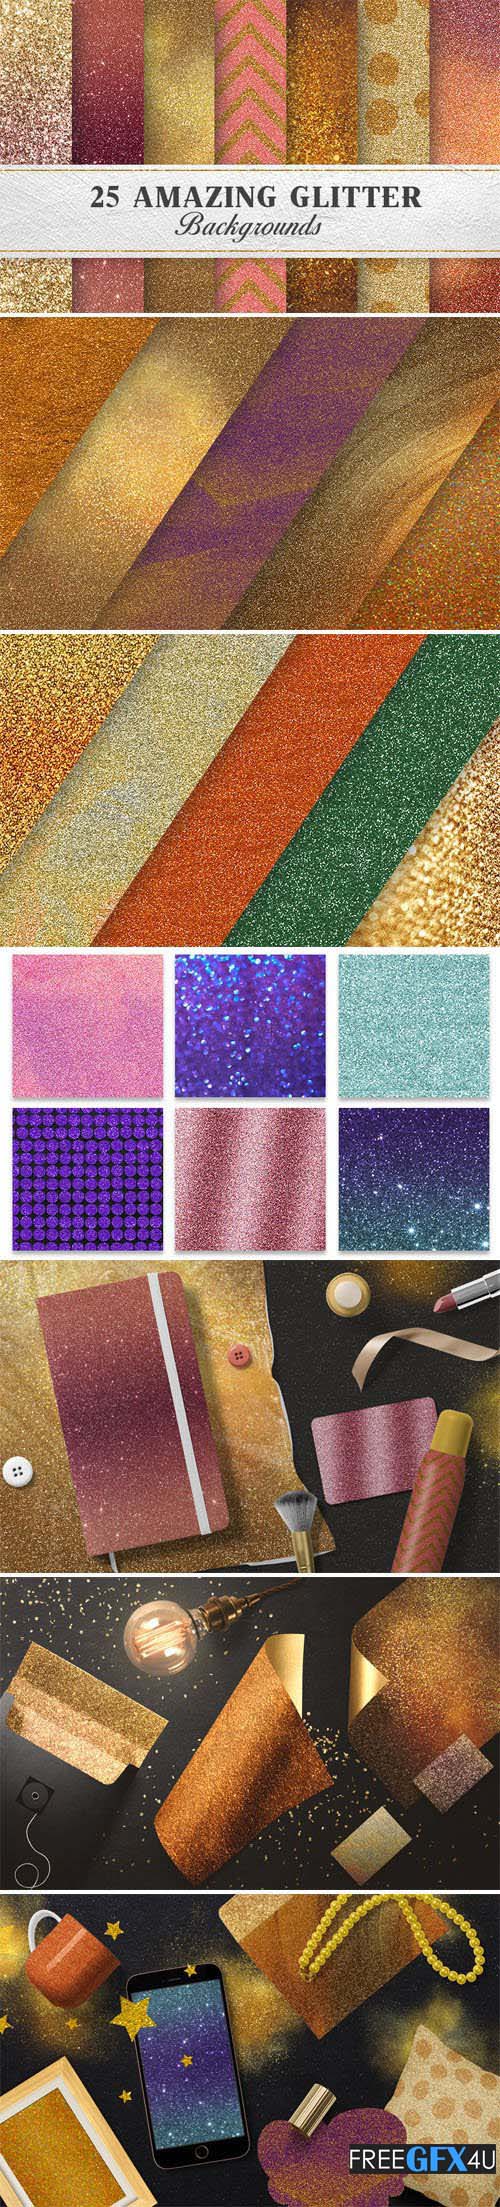 Amazing Glitter Backgrounds Pack Free Download